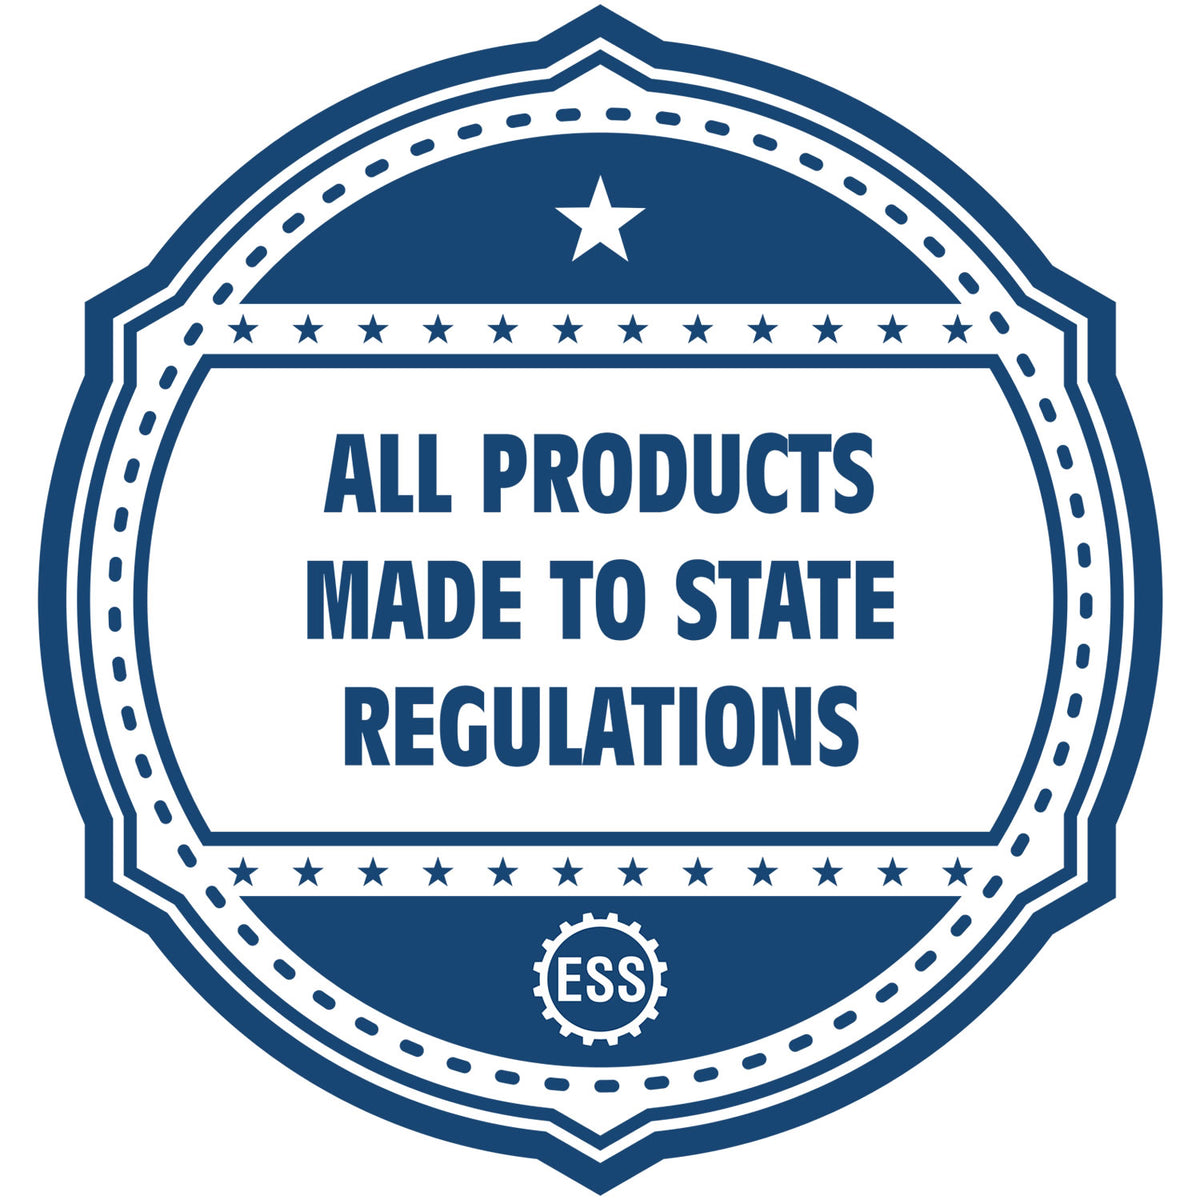 An icon or badge element for the PSI Washington Notary Stamp showing that this product is made in compliance with state regulations.